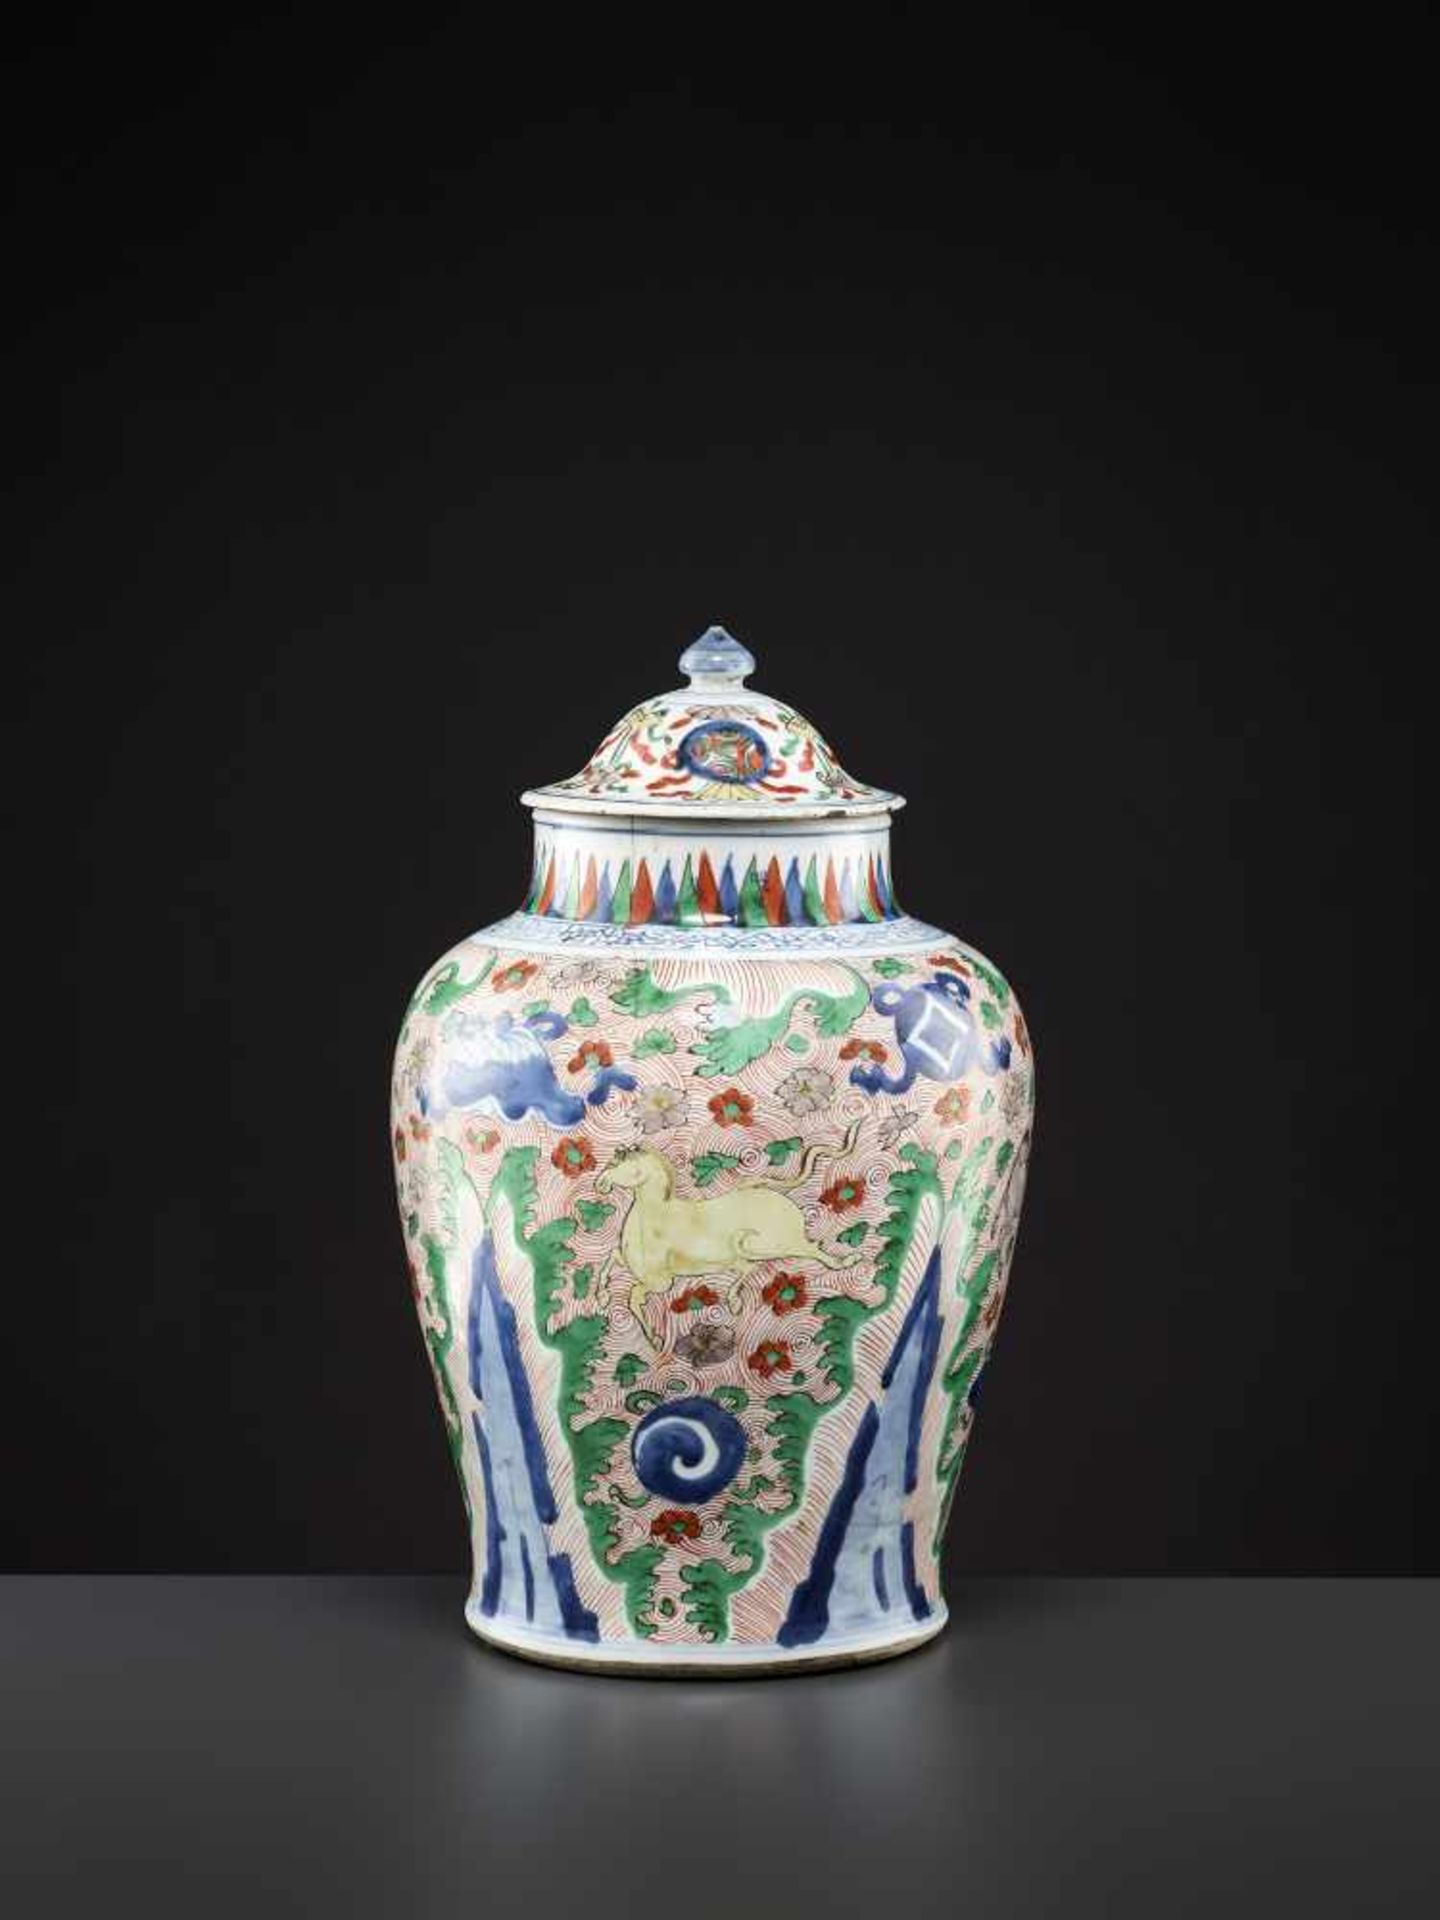 A LIDDED WUCAI VASE, MING DYNASTY China, 16th - 17th century. Freely painted in underglaze blue, - Image 4 of 9